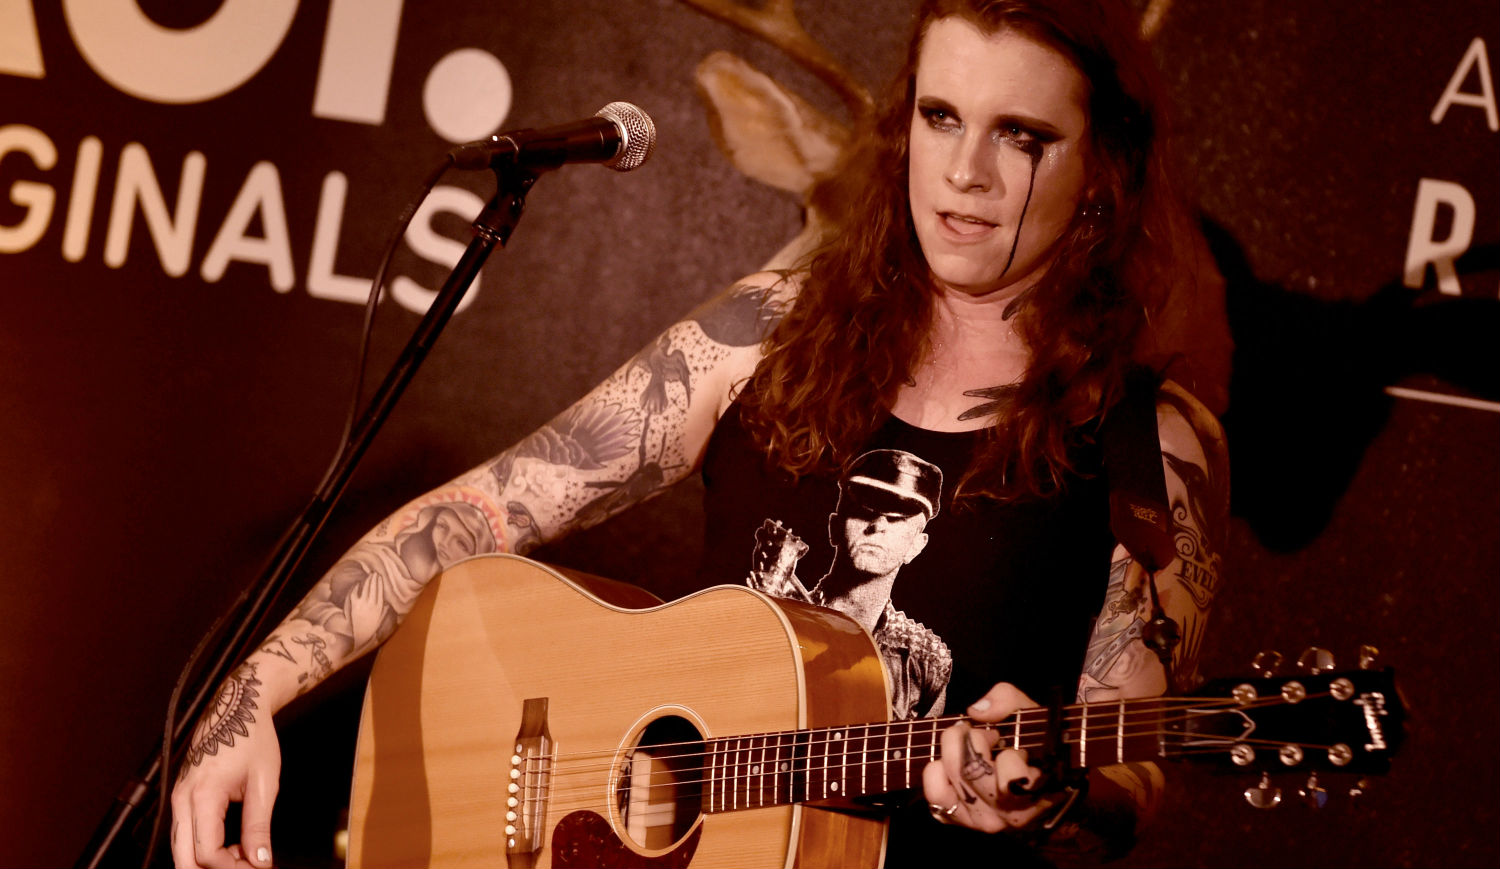 Watch Against Me!'s Laura Jane Grace Perform at the Infamous Four